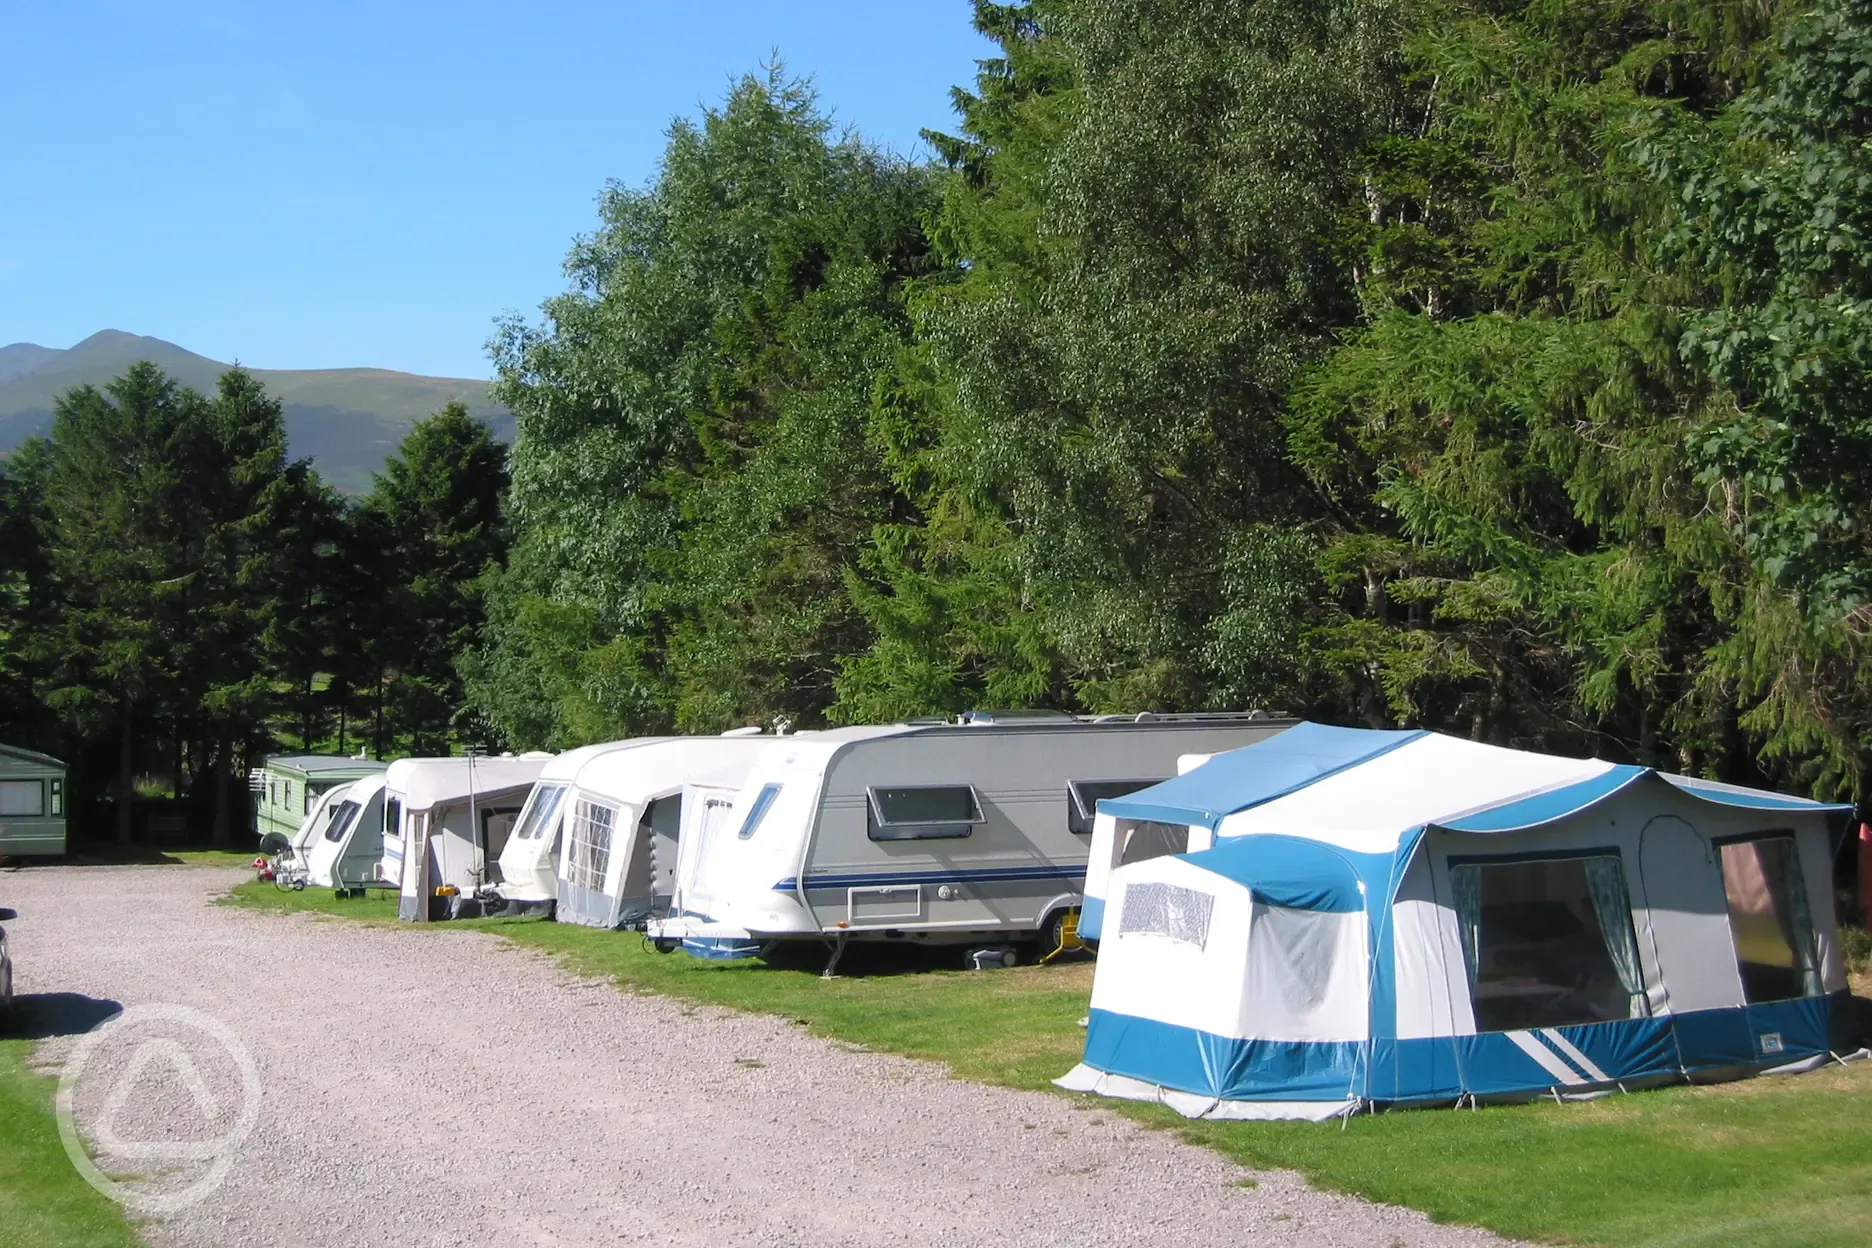 Pitches with electric hook ups for tourers and motor homes